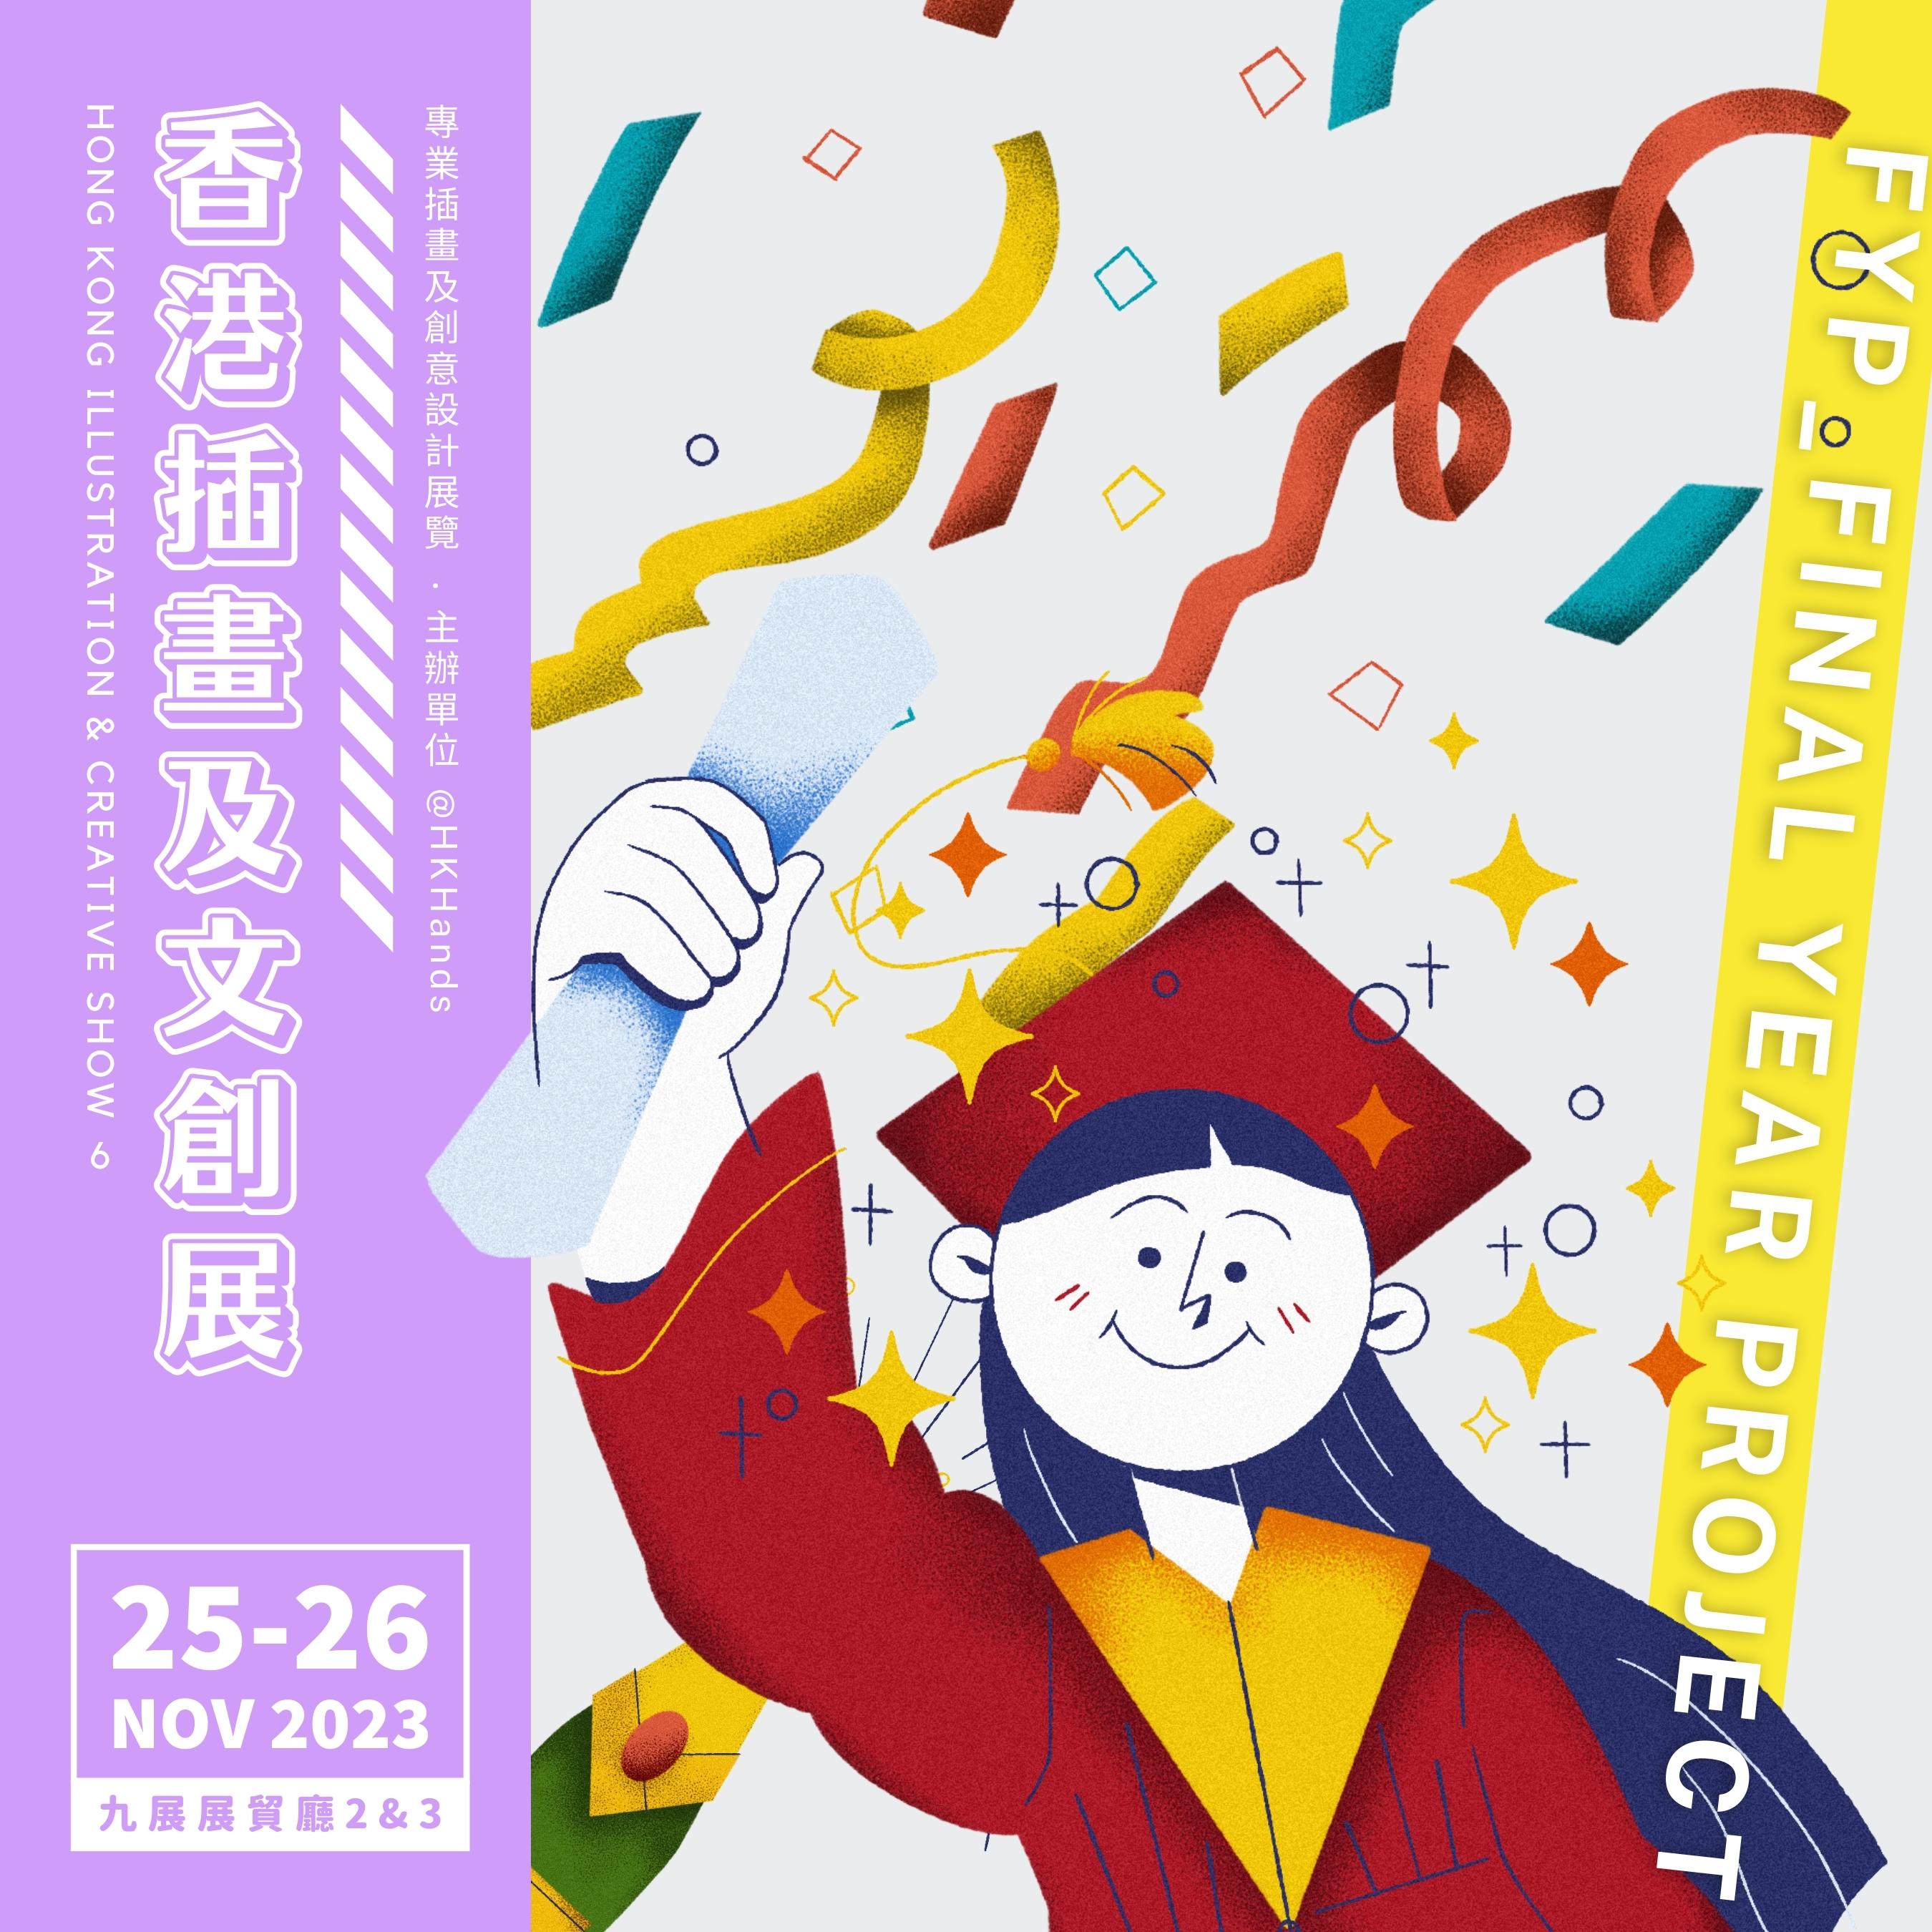 Hong Kong Illustration and Creative Show 6 (Satellite Event of CityProg 2023)